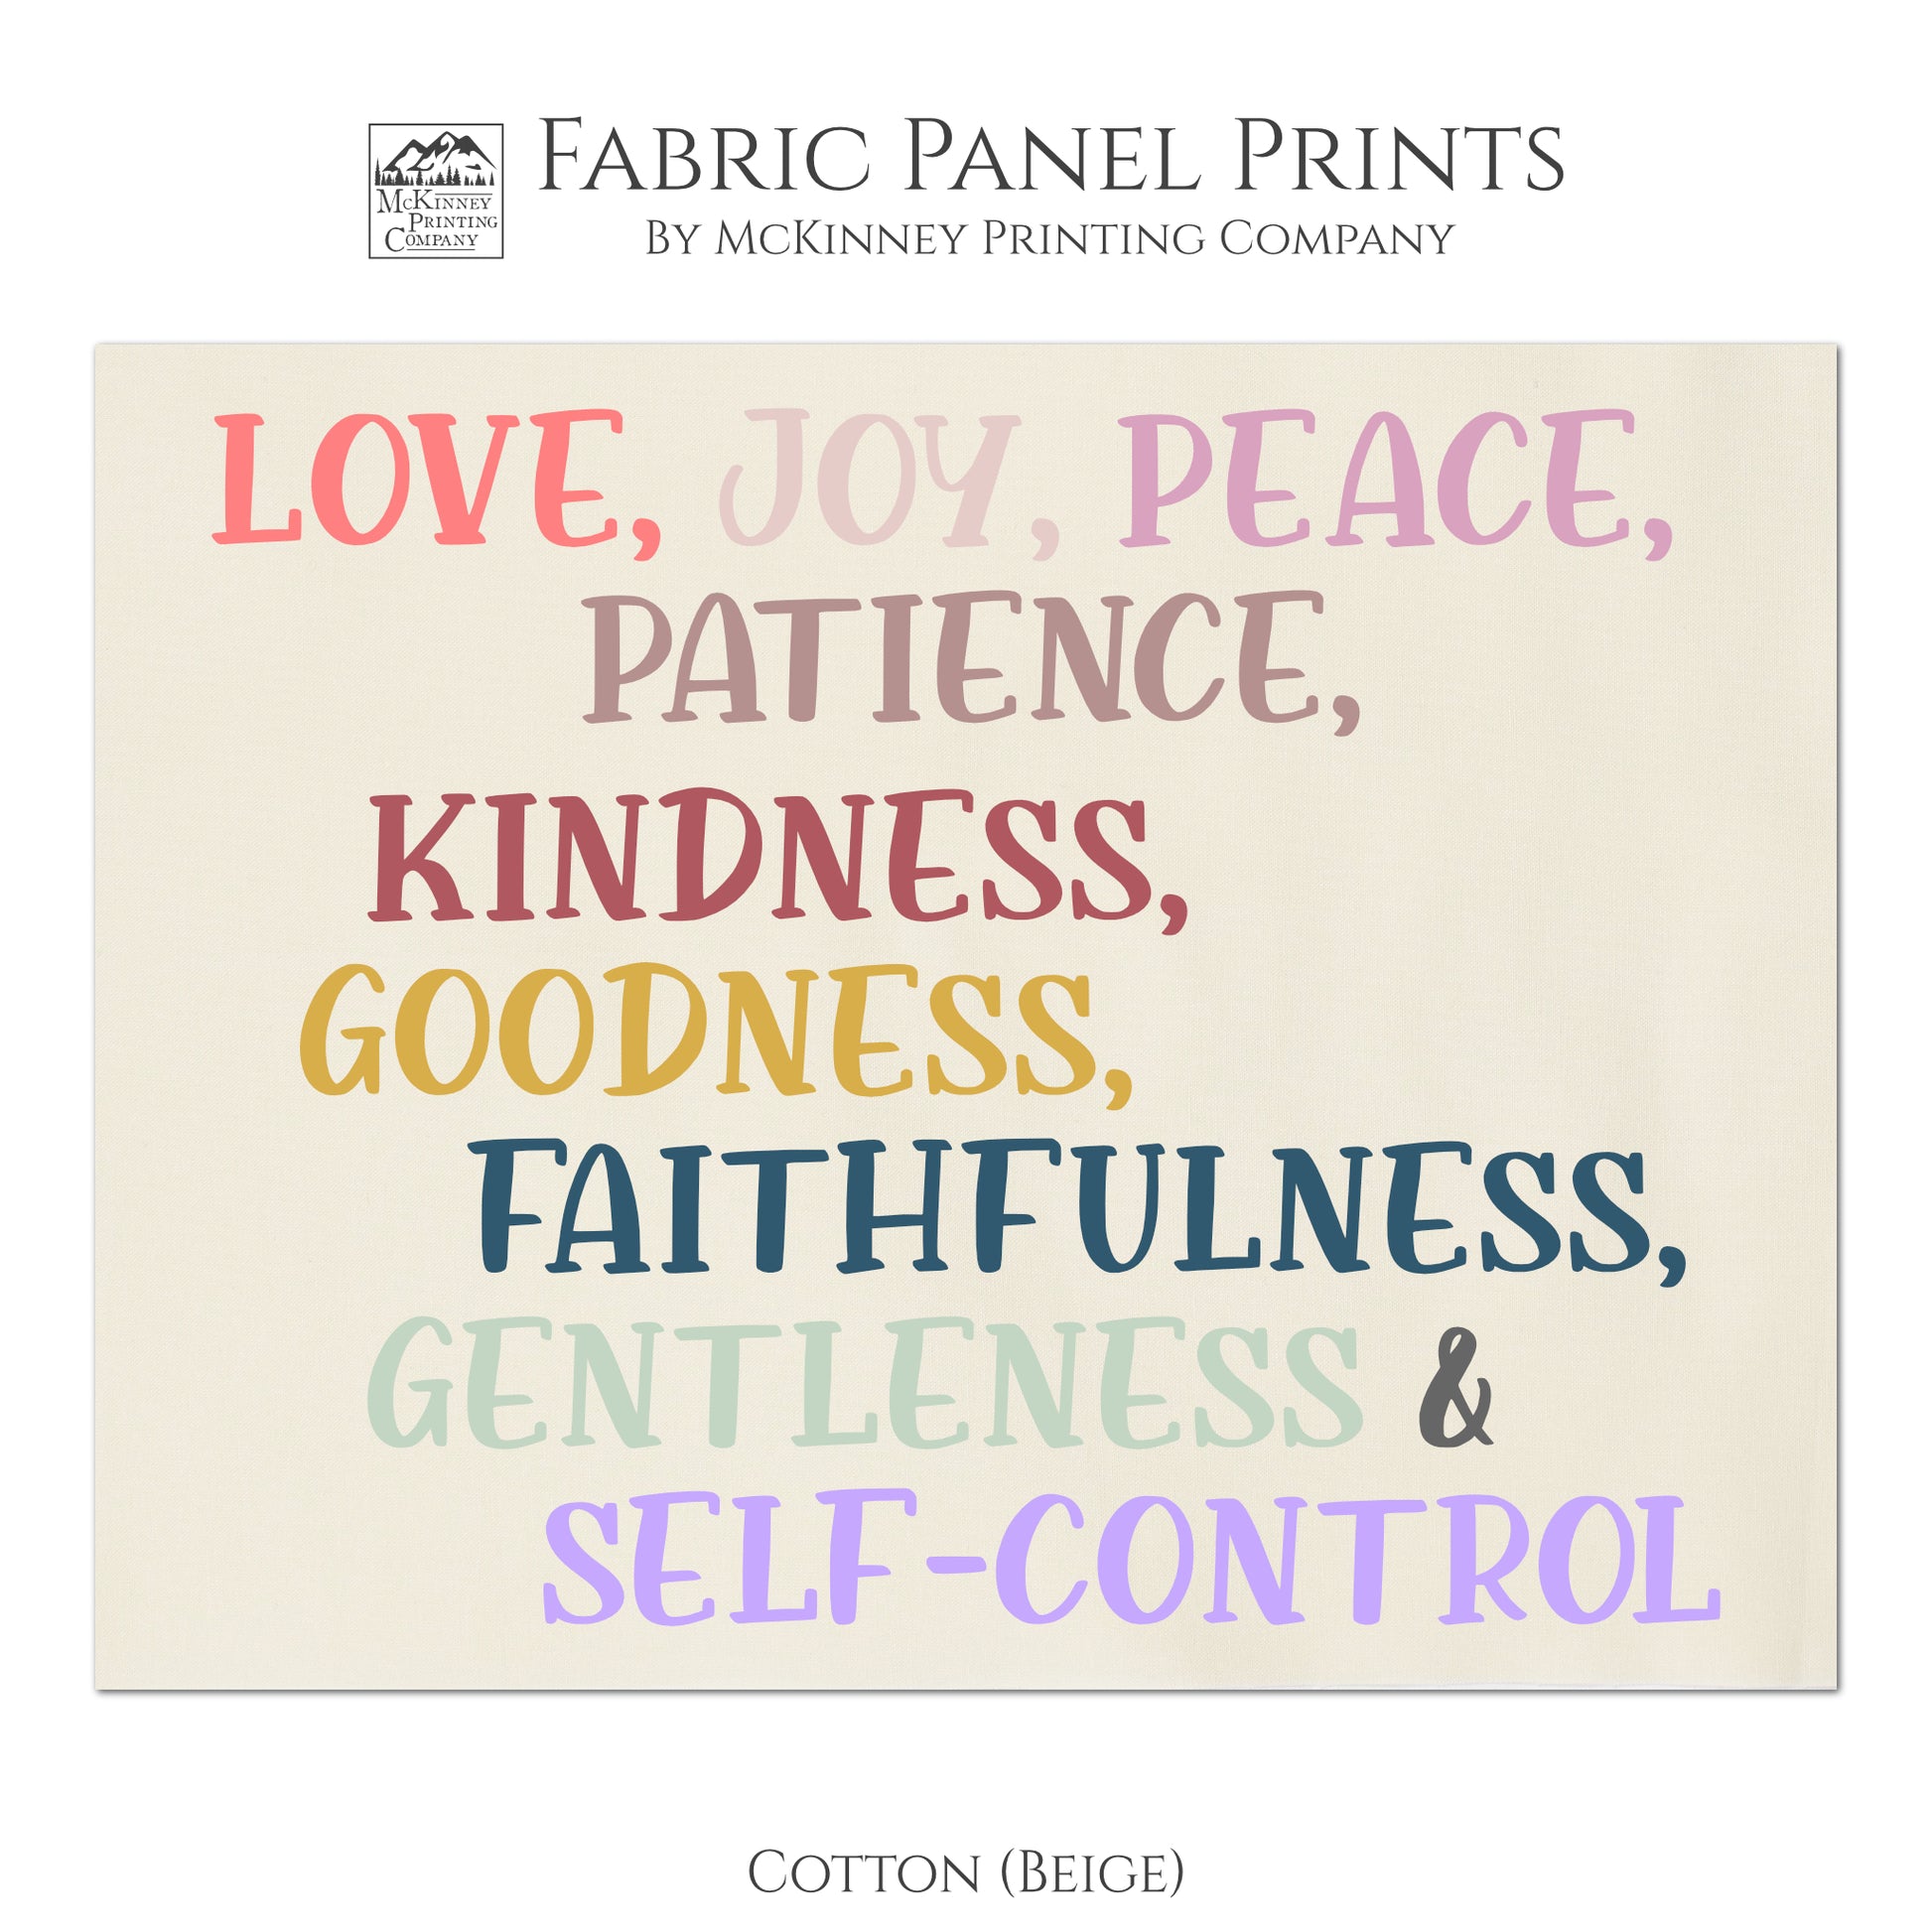 Fruit of the Spirit - Love, Joy, Peace, Patience, Kindness, Goodness, Faithfulness, Gentleness and Self-Control - Religions Fabric, Scripture Fabric, Quilt Block Fabric Panel - Cotton